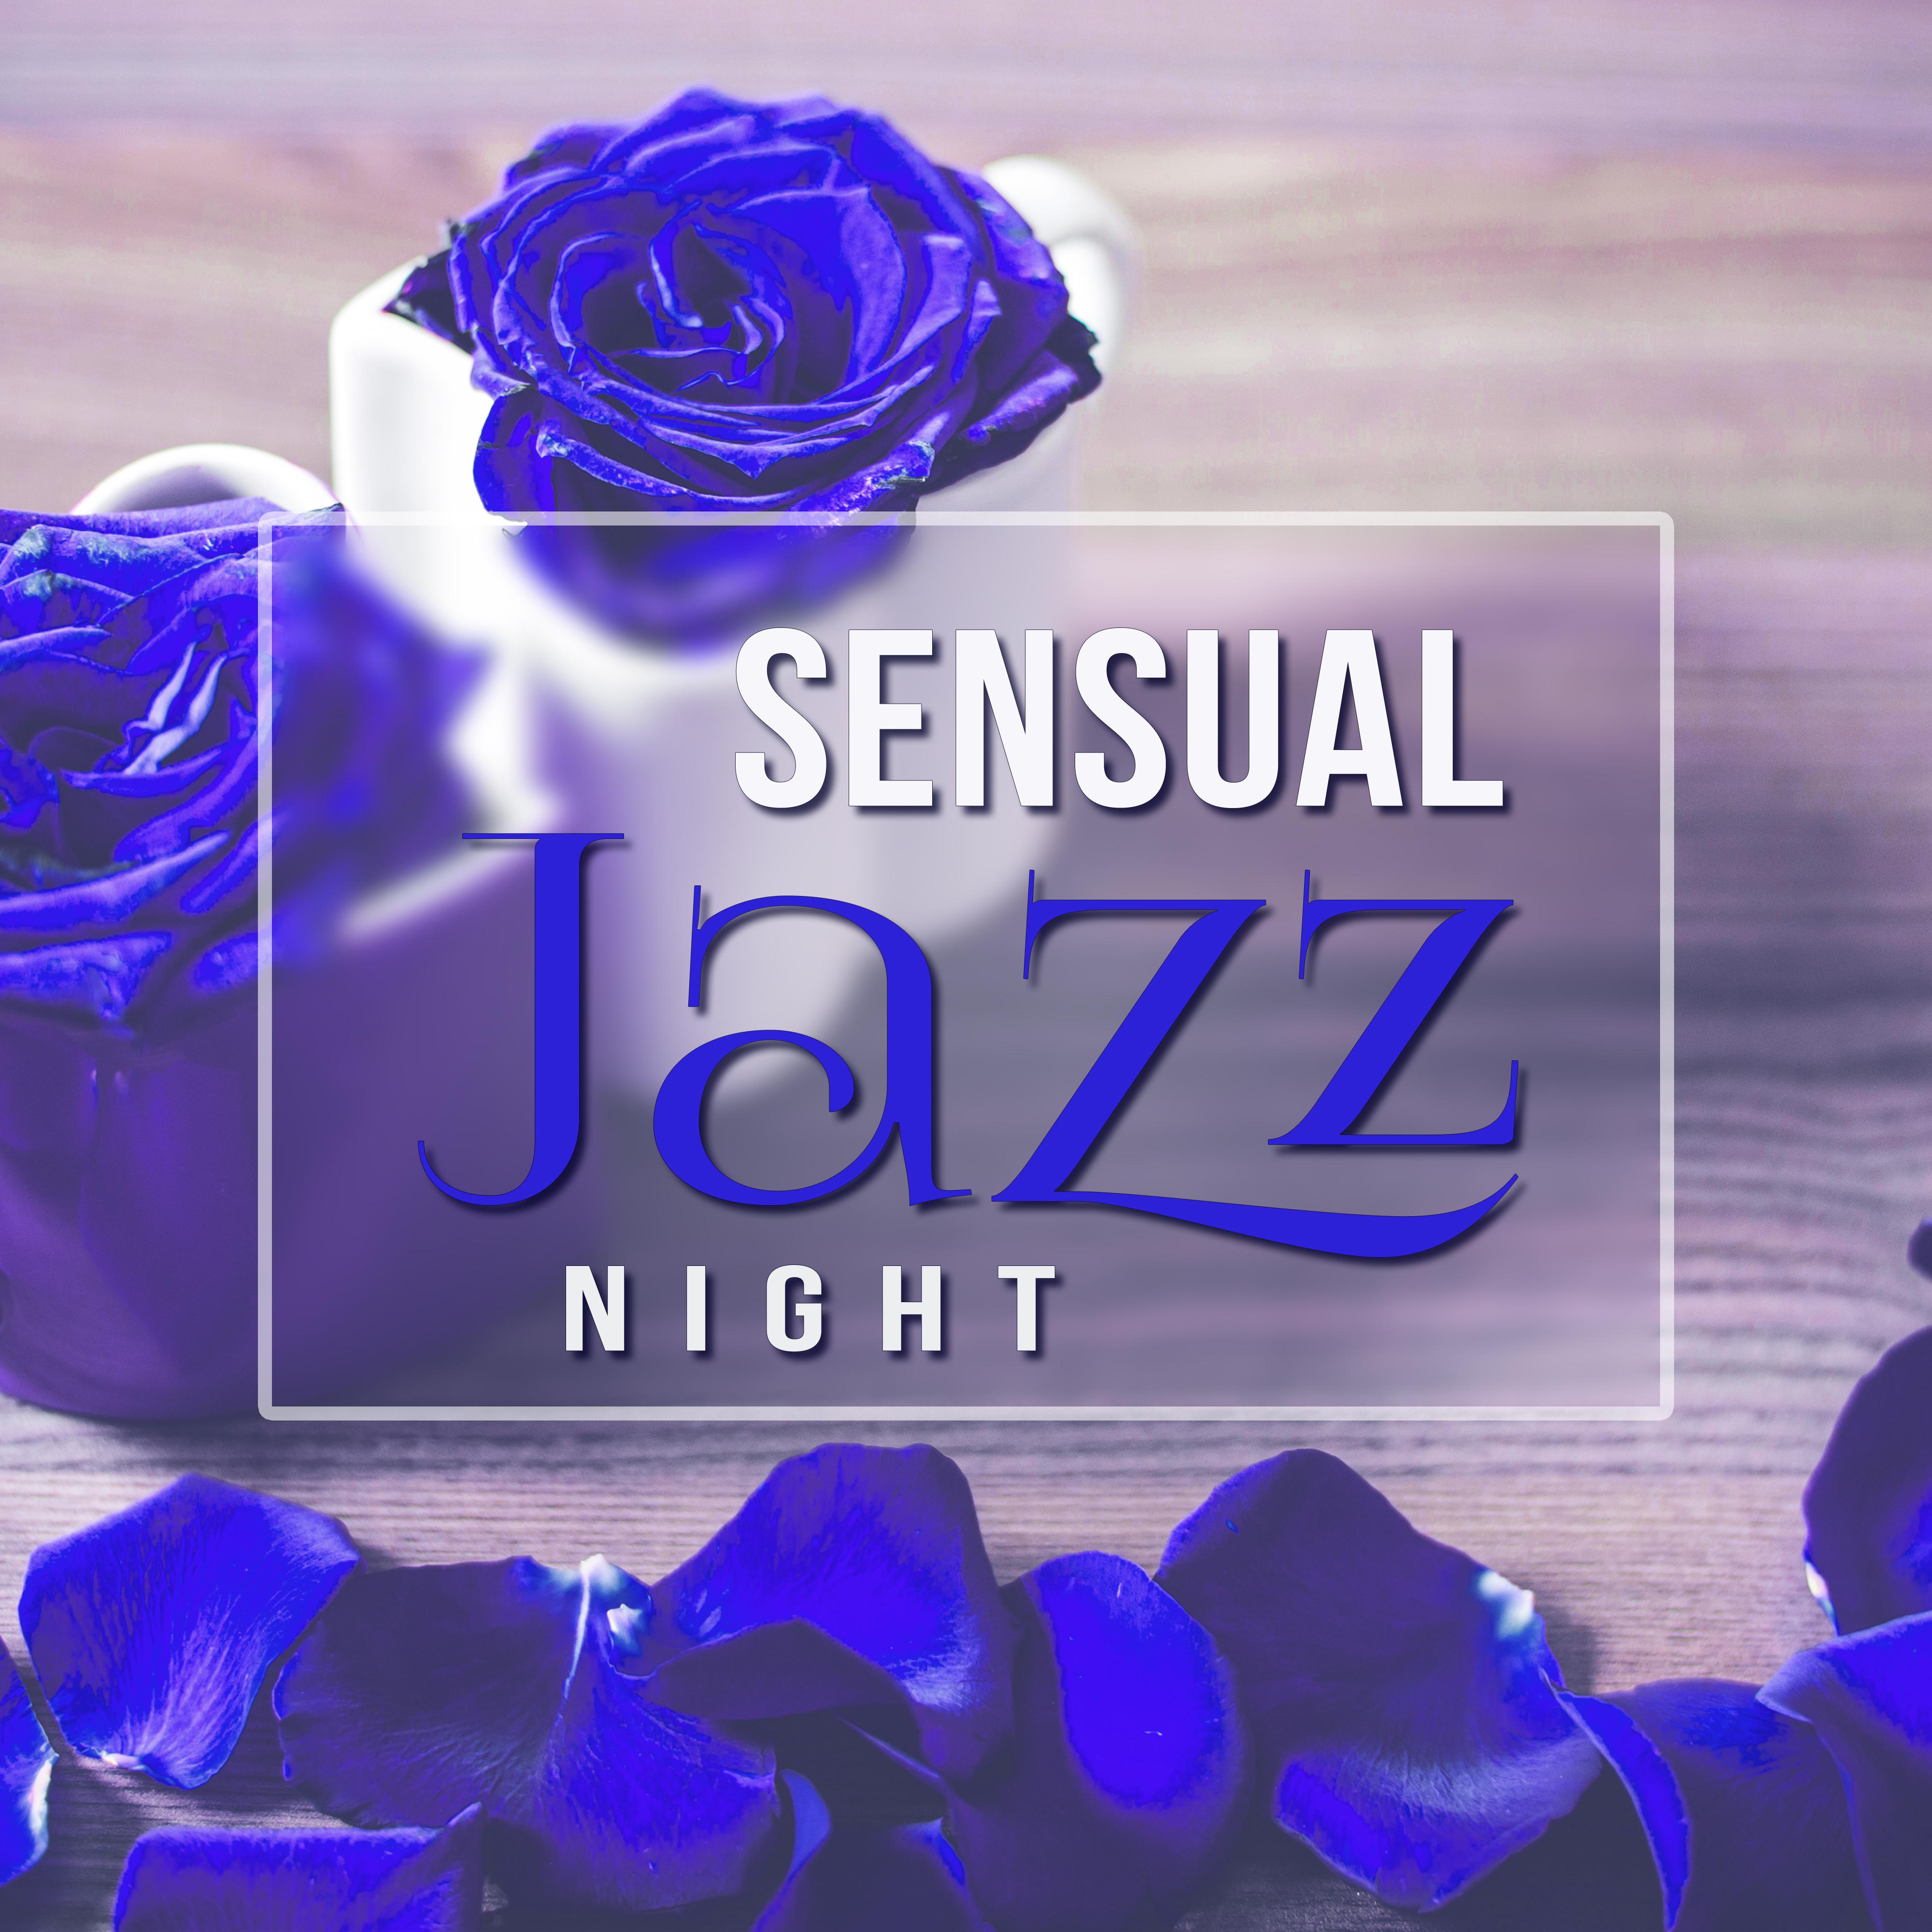 Sensual Jazz Night – Romantic Night with Jazz, Smooth Piano Bar, Relaxing Music, Shades of Lovers